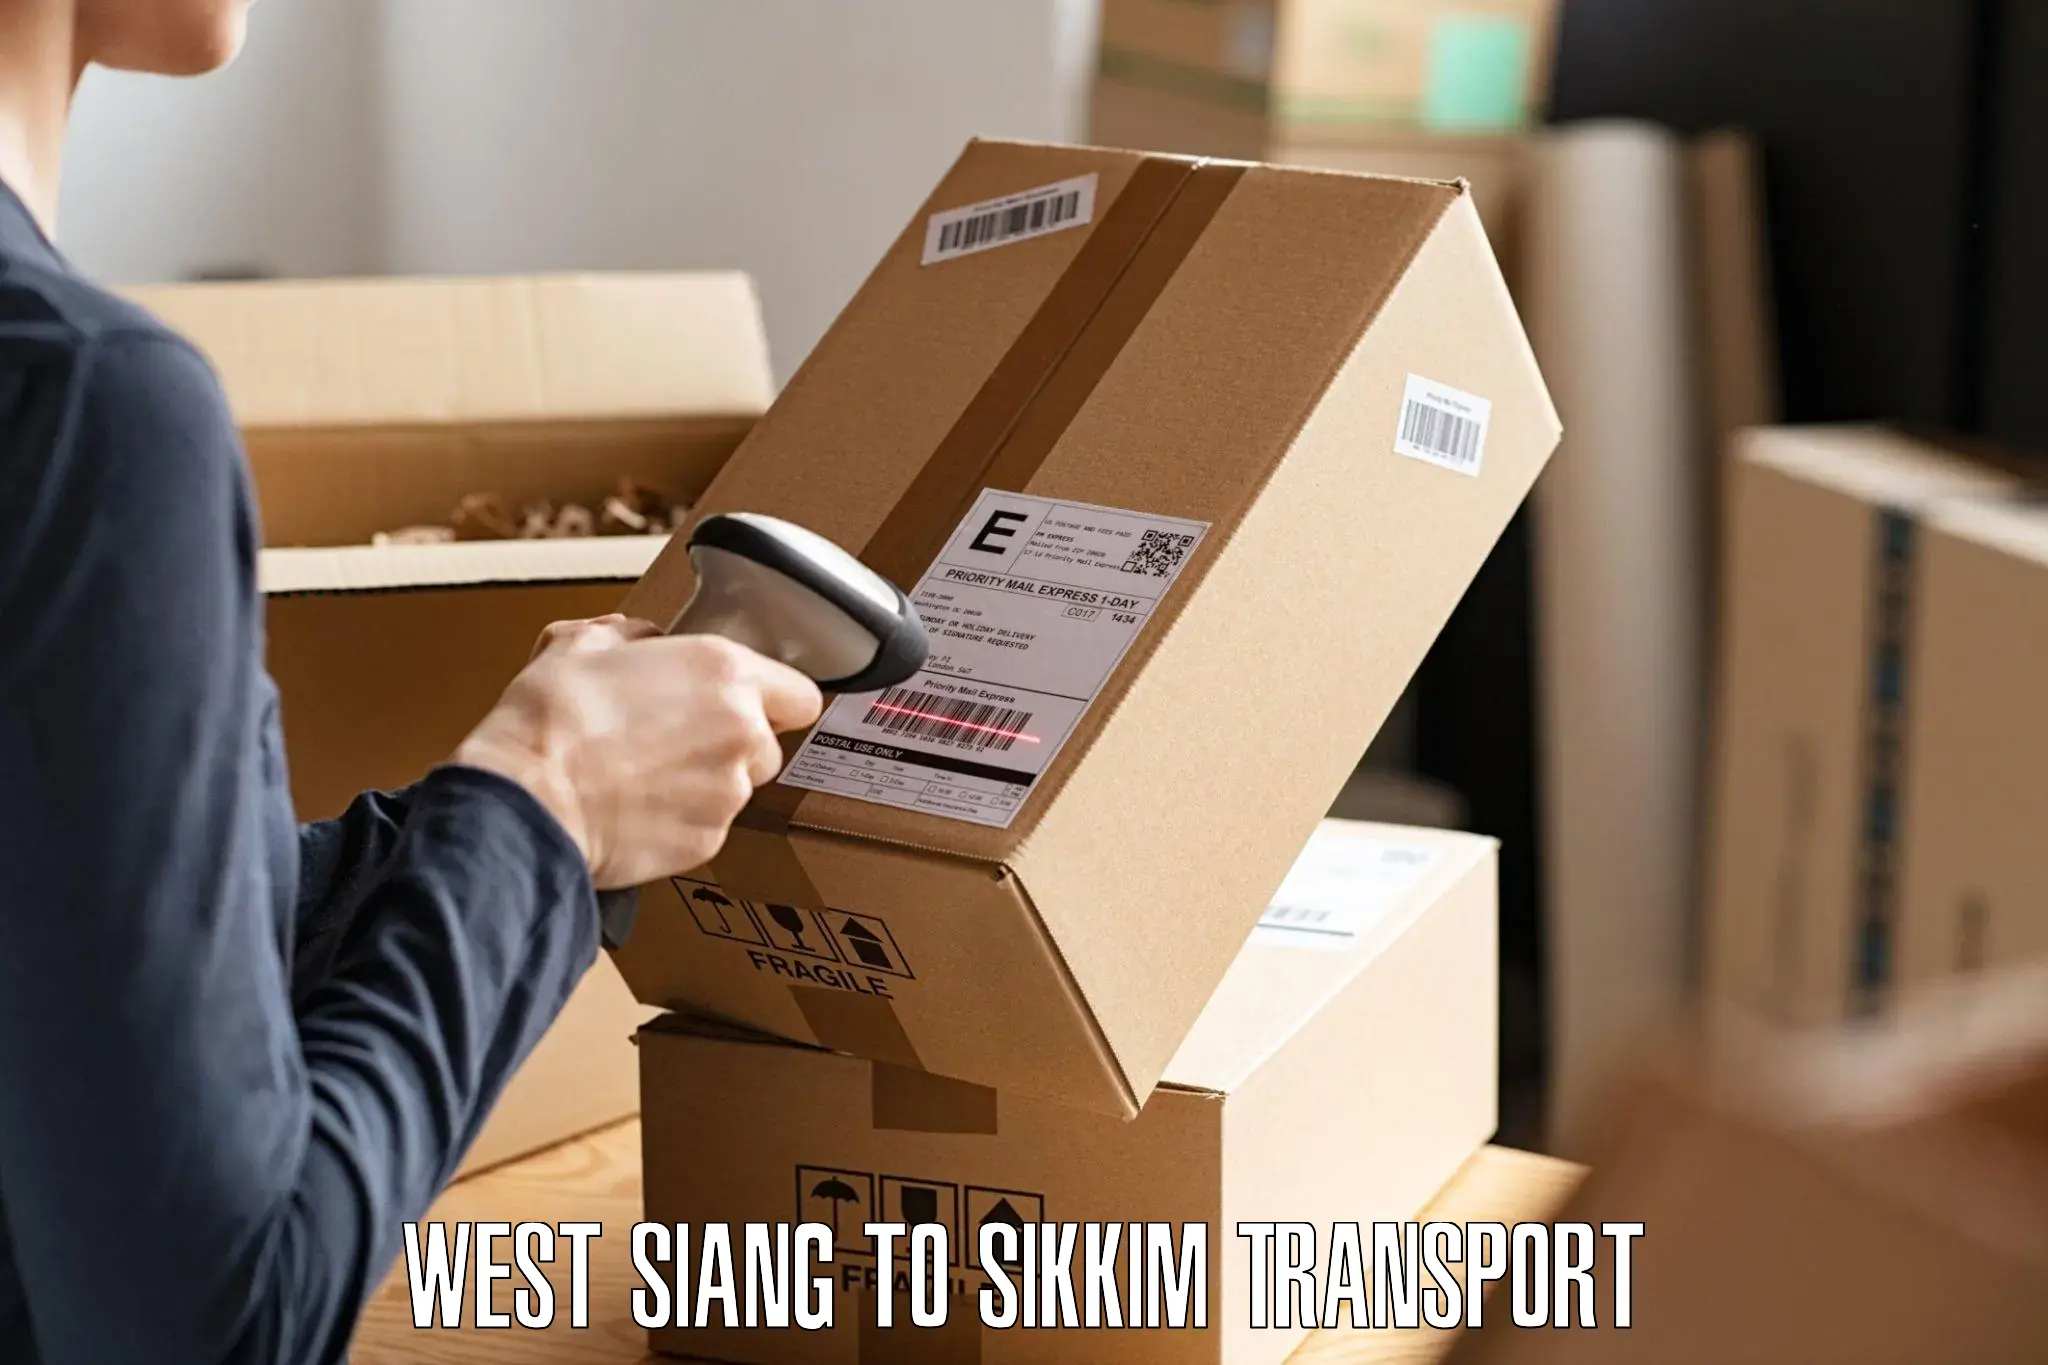 Online transport service West Siang to Sikkim